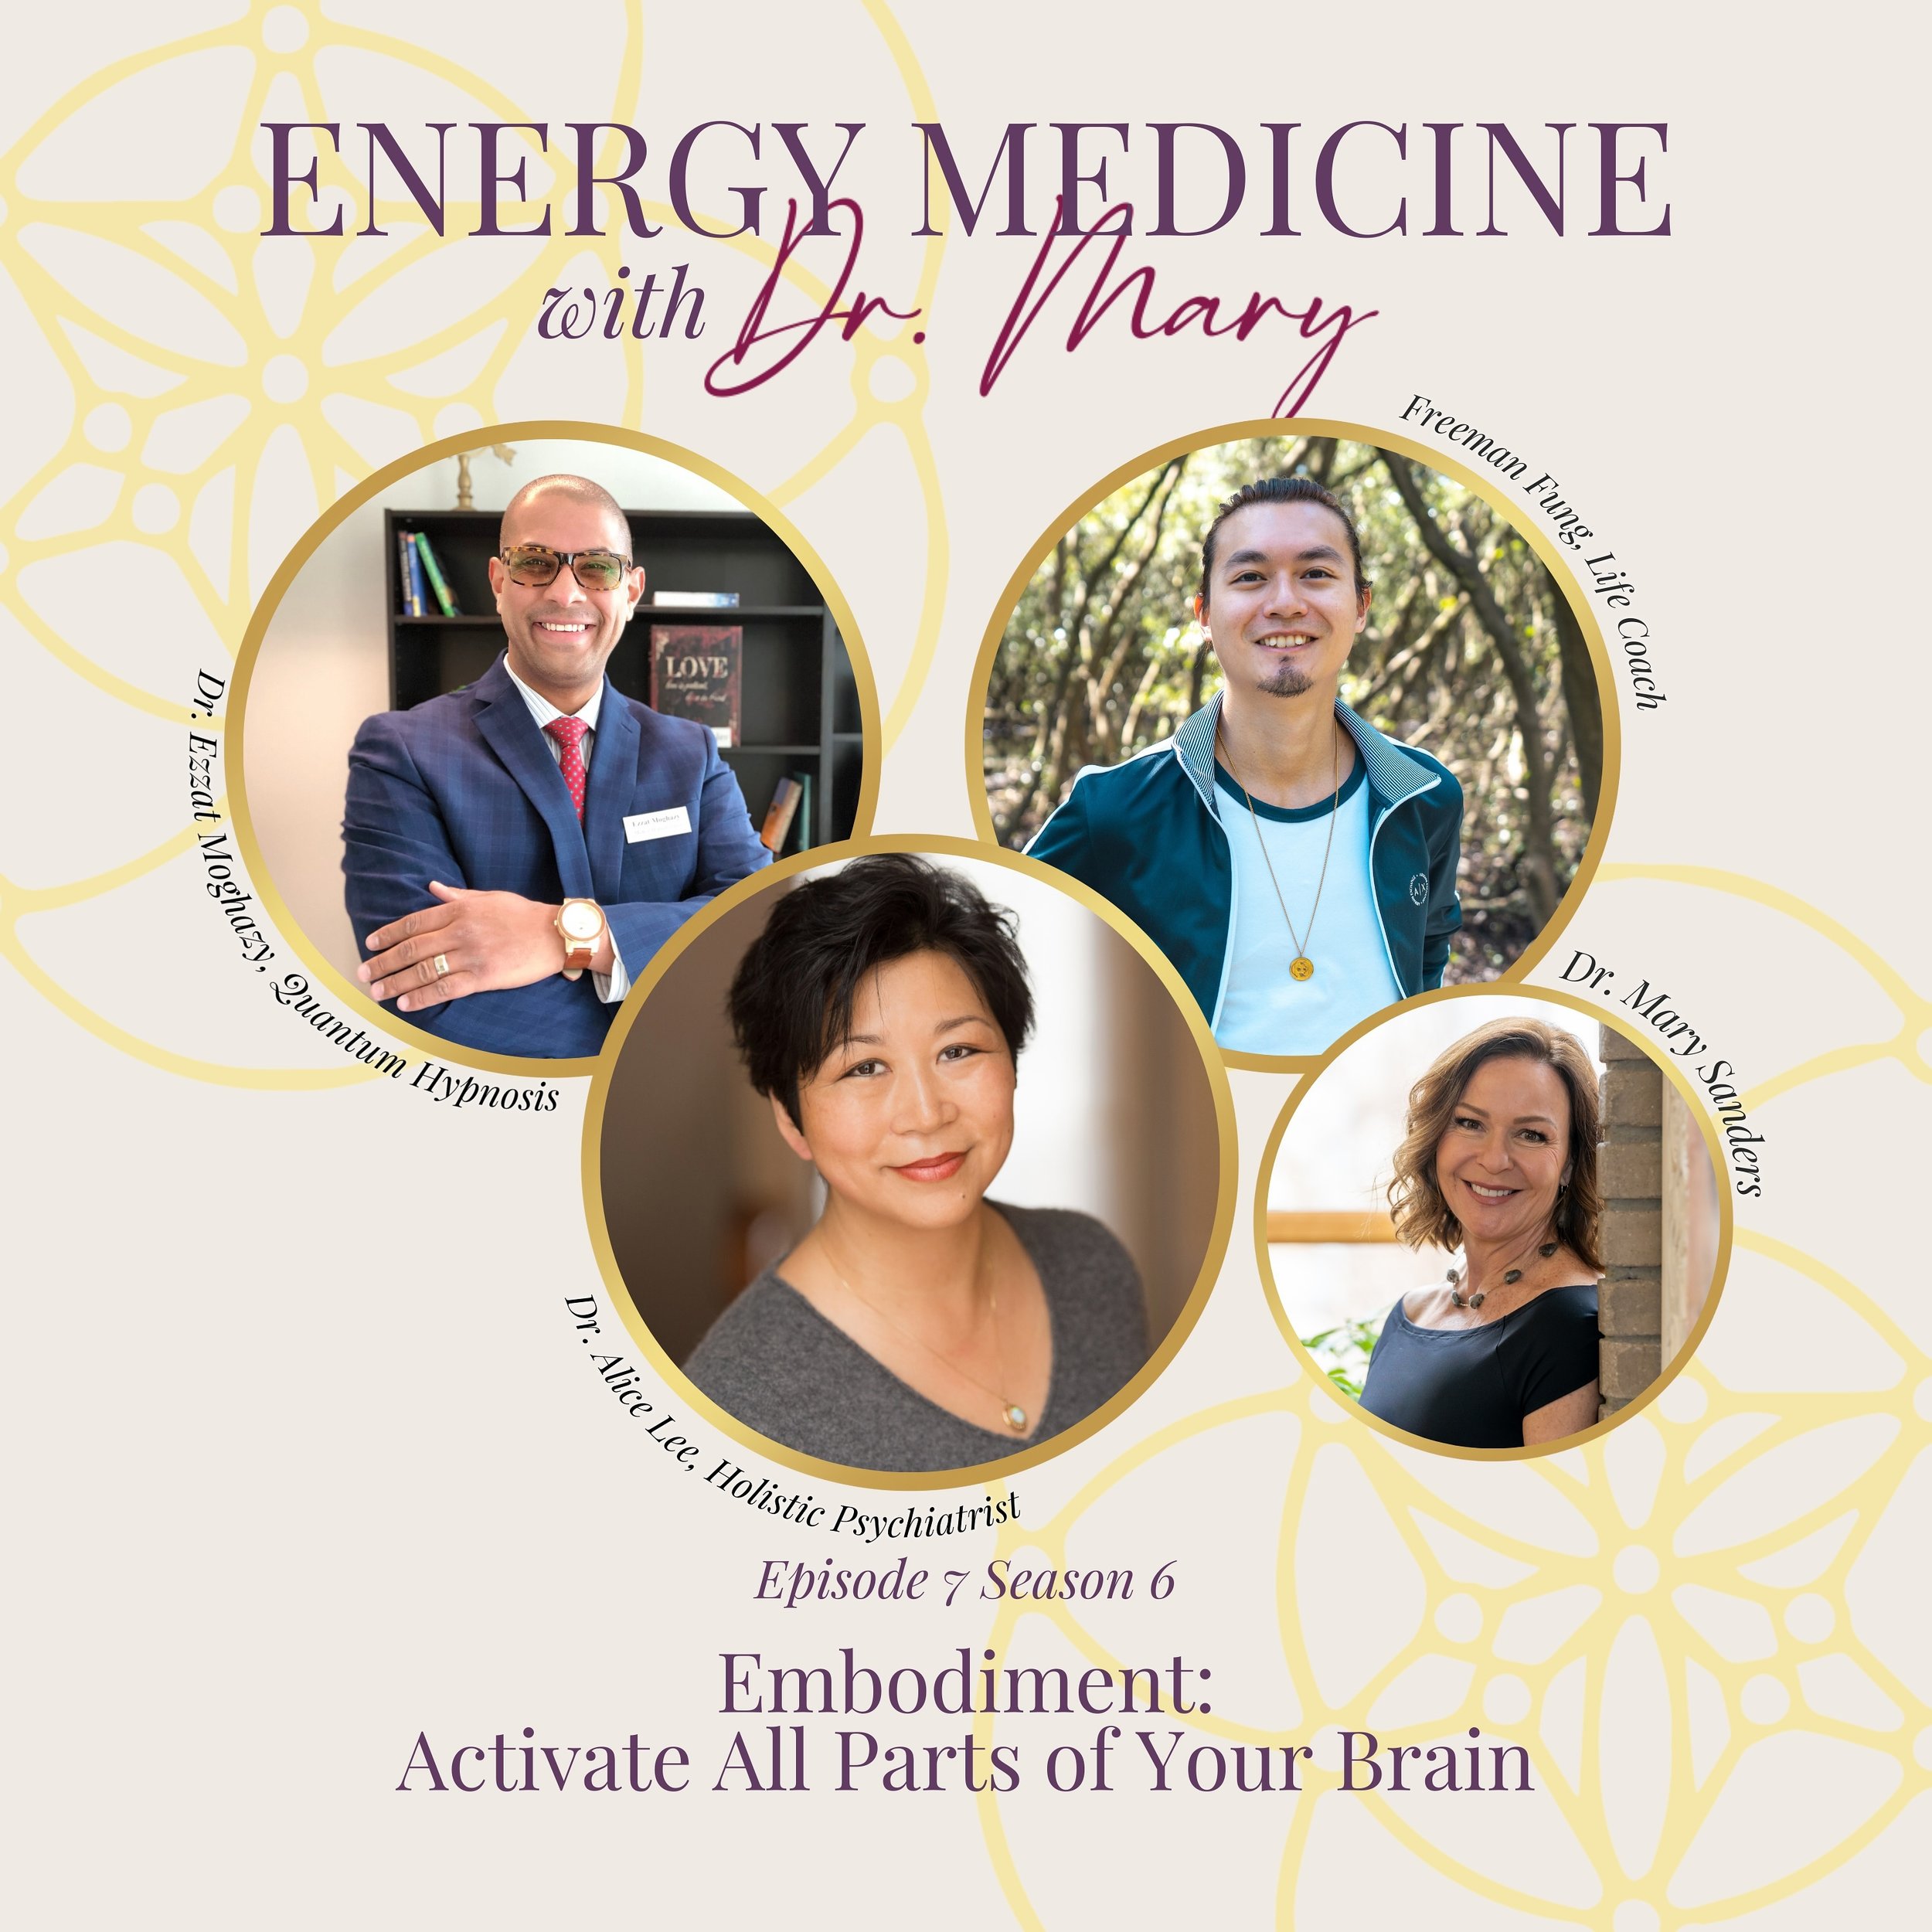 🌟 Ready to dive deep into inner journey mastery and elevate your travel wellbeing game? 🎙️✈️✨

Joined by Holistic Psychiatry expert Dr. Alice Lee, Quantum Hypnosis specialist Dr. Ezzat Moghazy, and our inspiring Energy Medicine Podcast Host, Dr. Ma